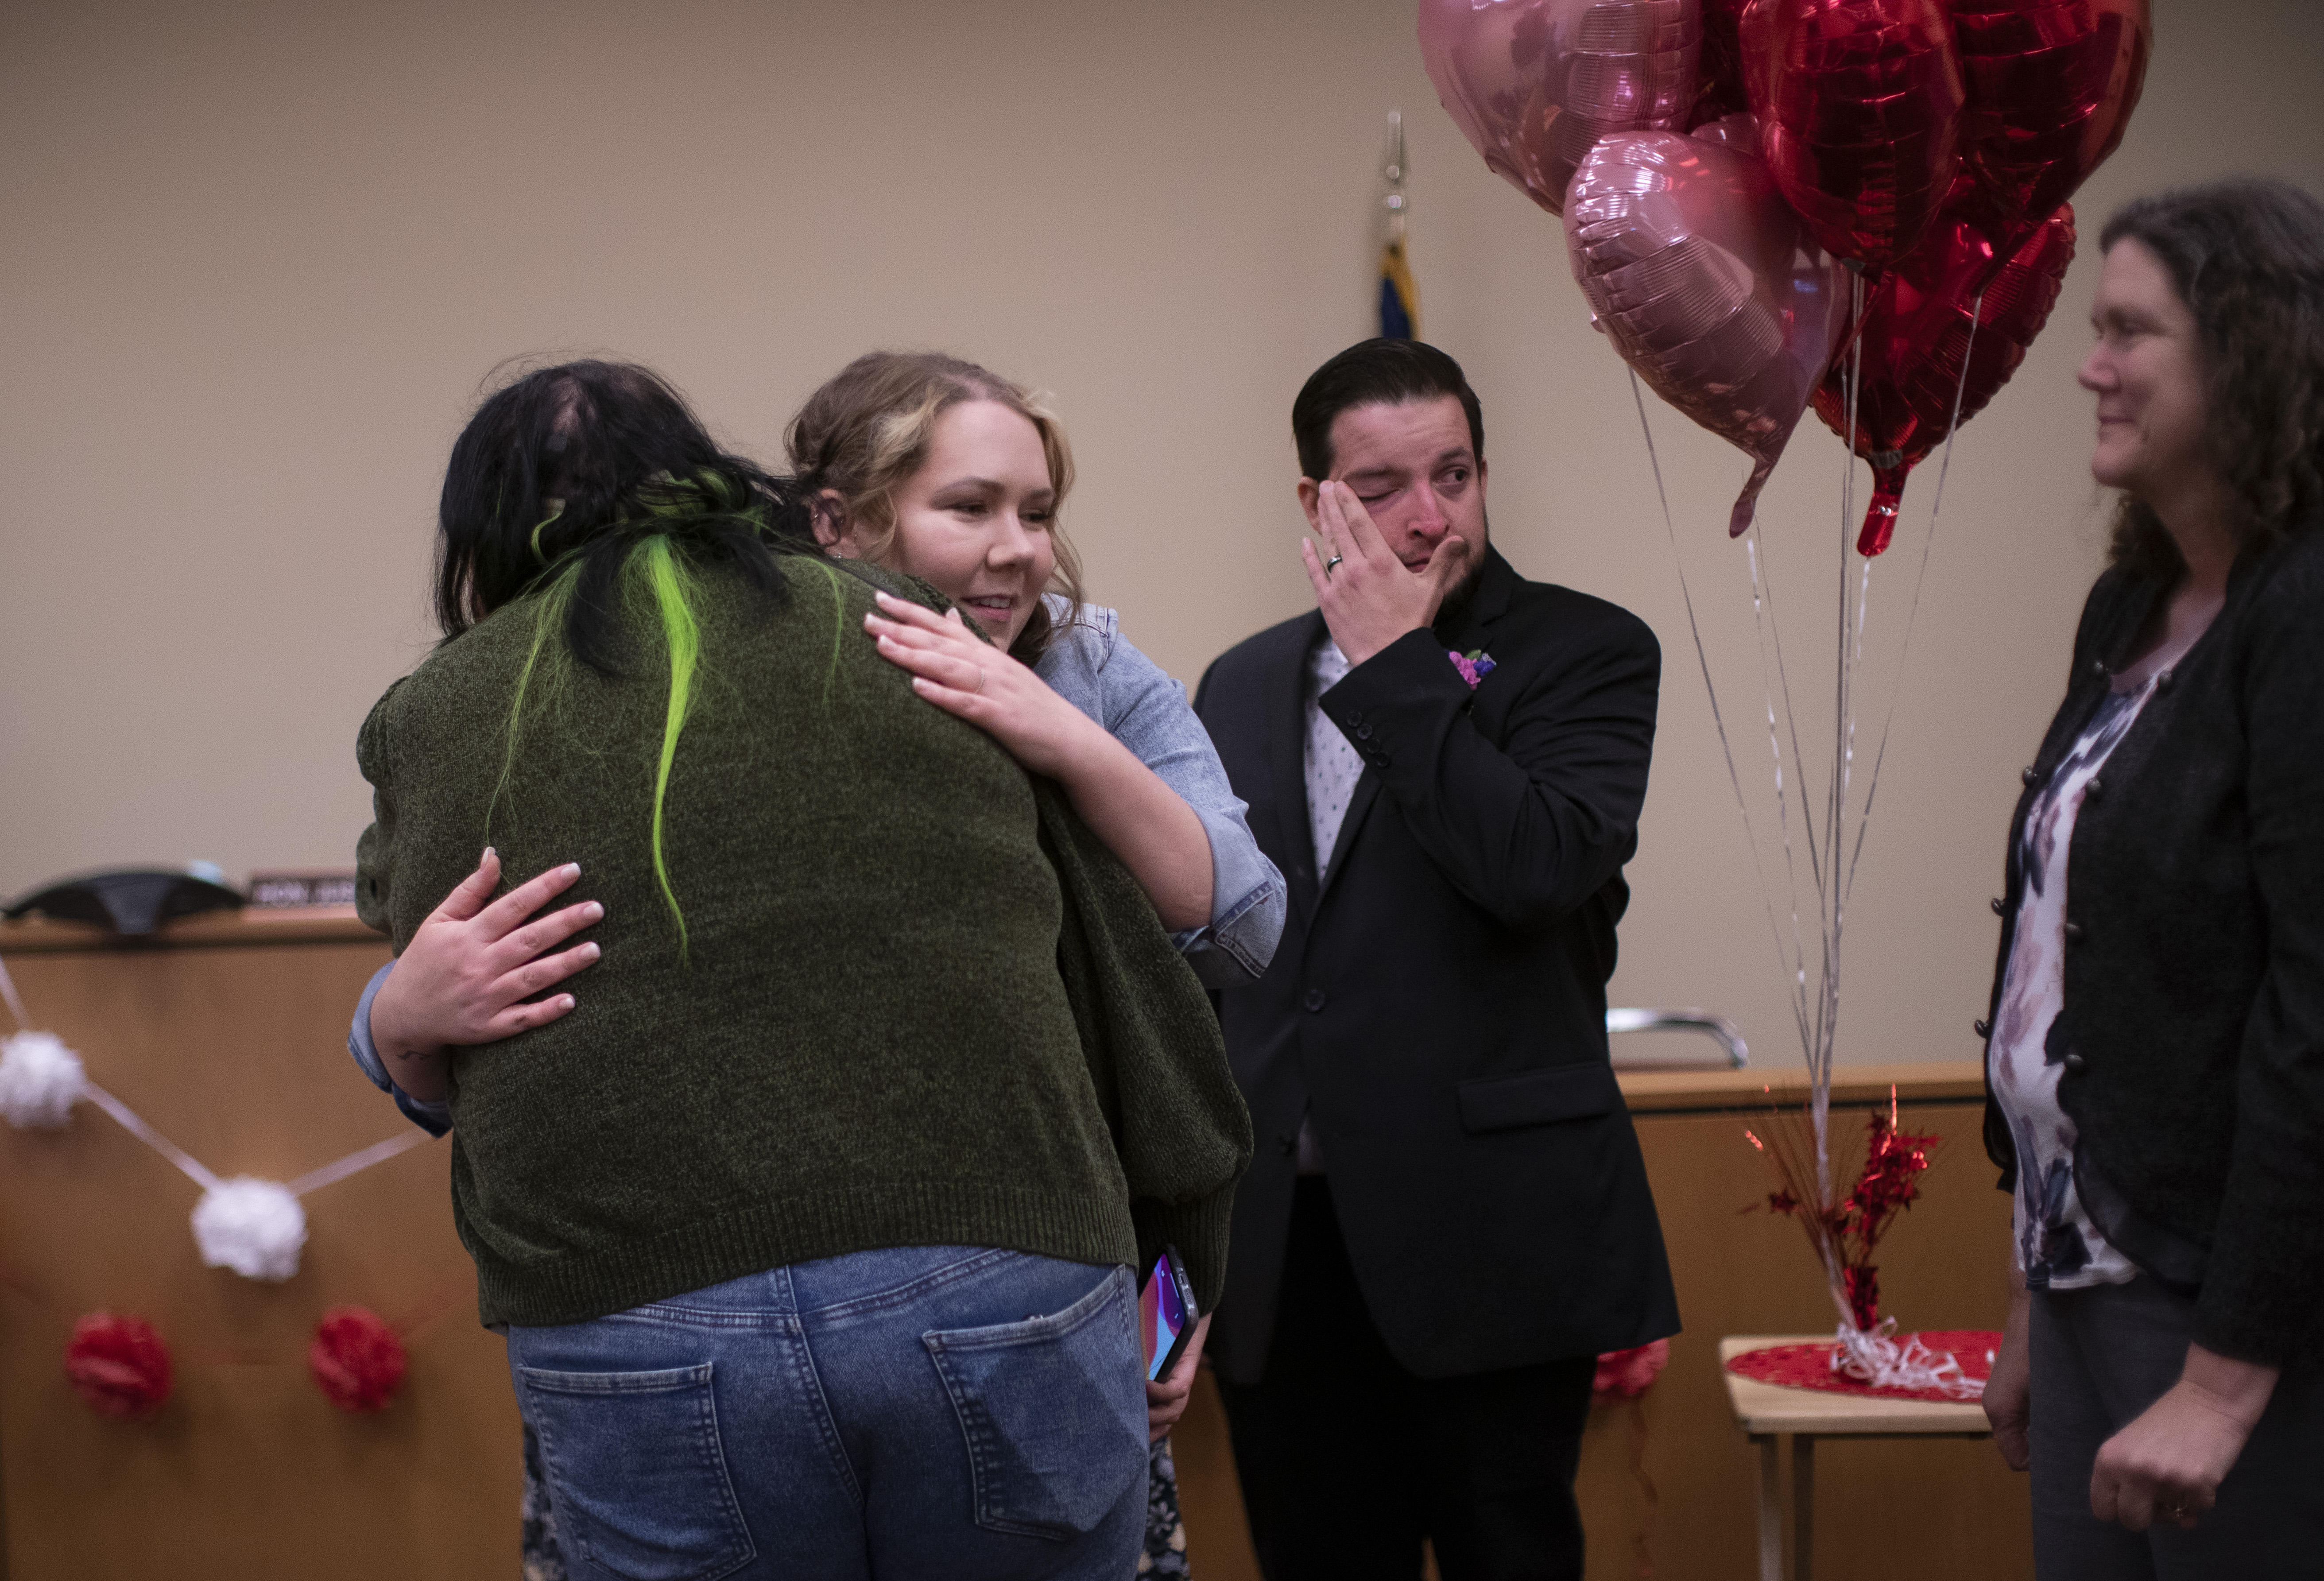 Ashley and Andrew Bretthauer were married at the Marion County Justice Court in Salem, February 14, 2023. Beth Nakamura/The Oregonian